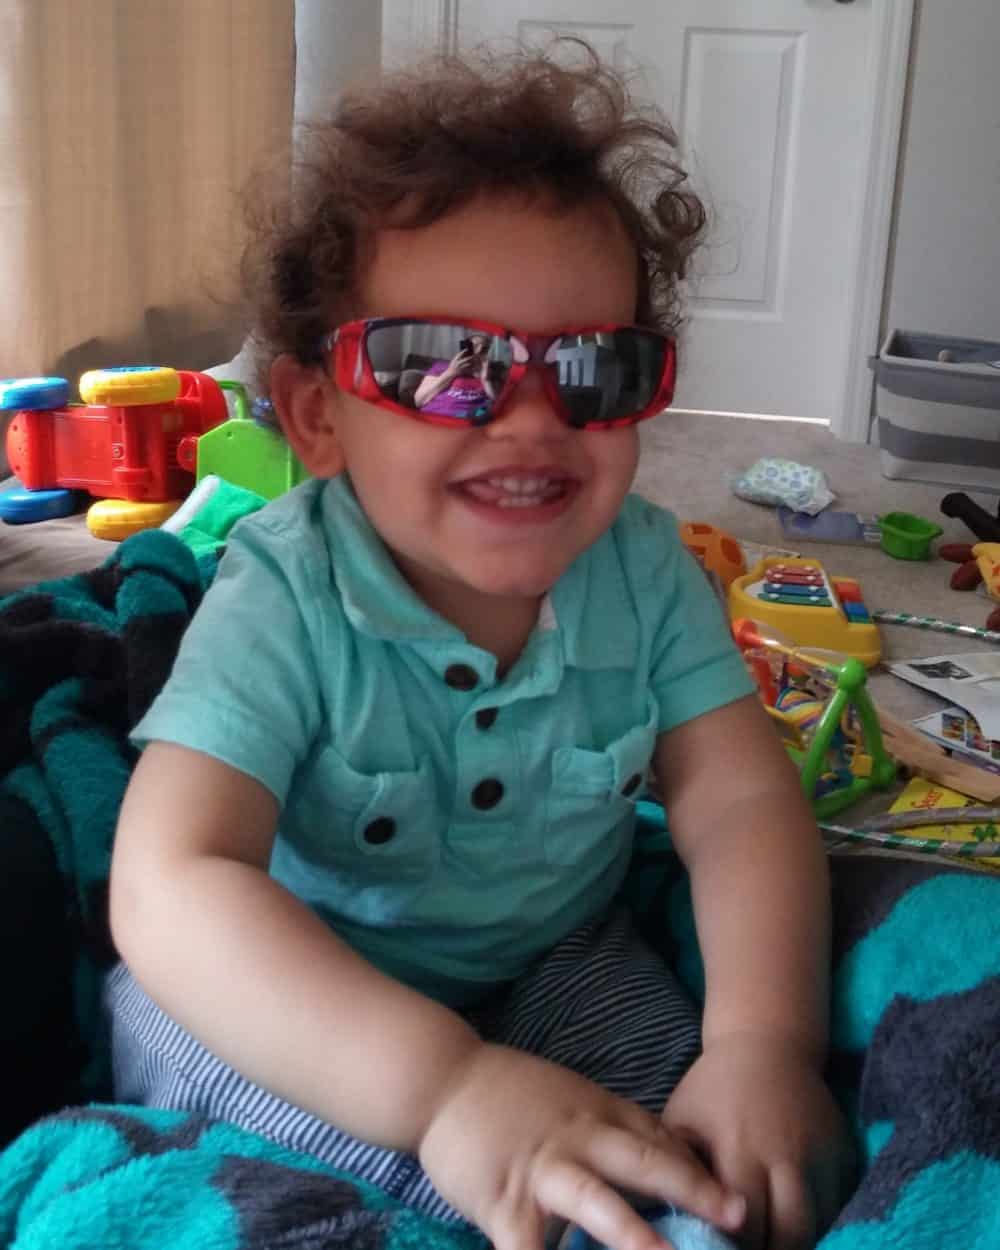 A toddler wearing sunglasses in his room.